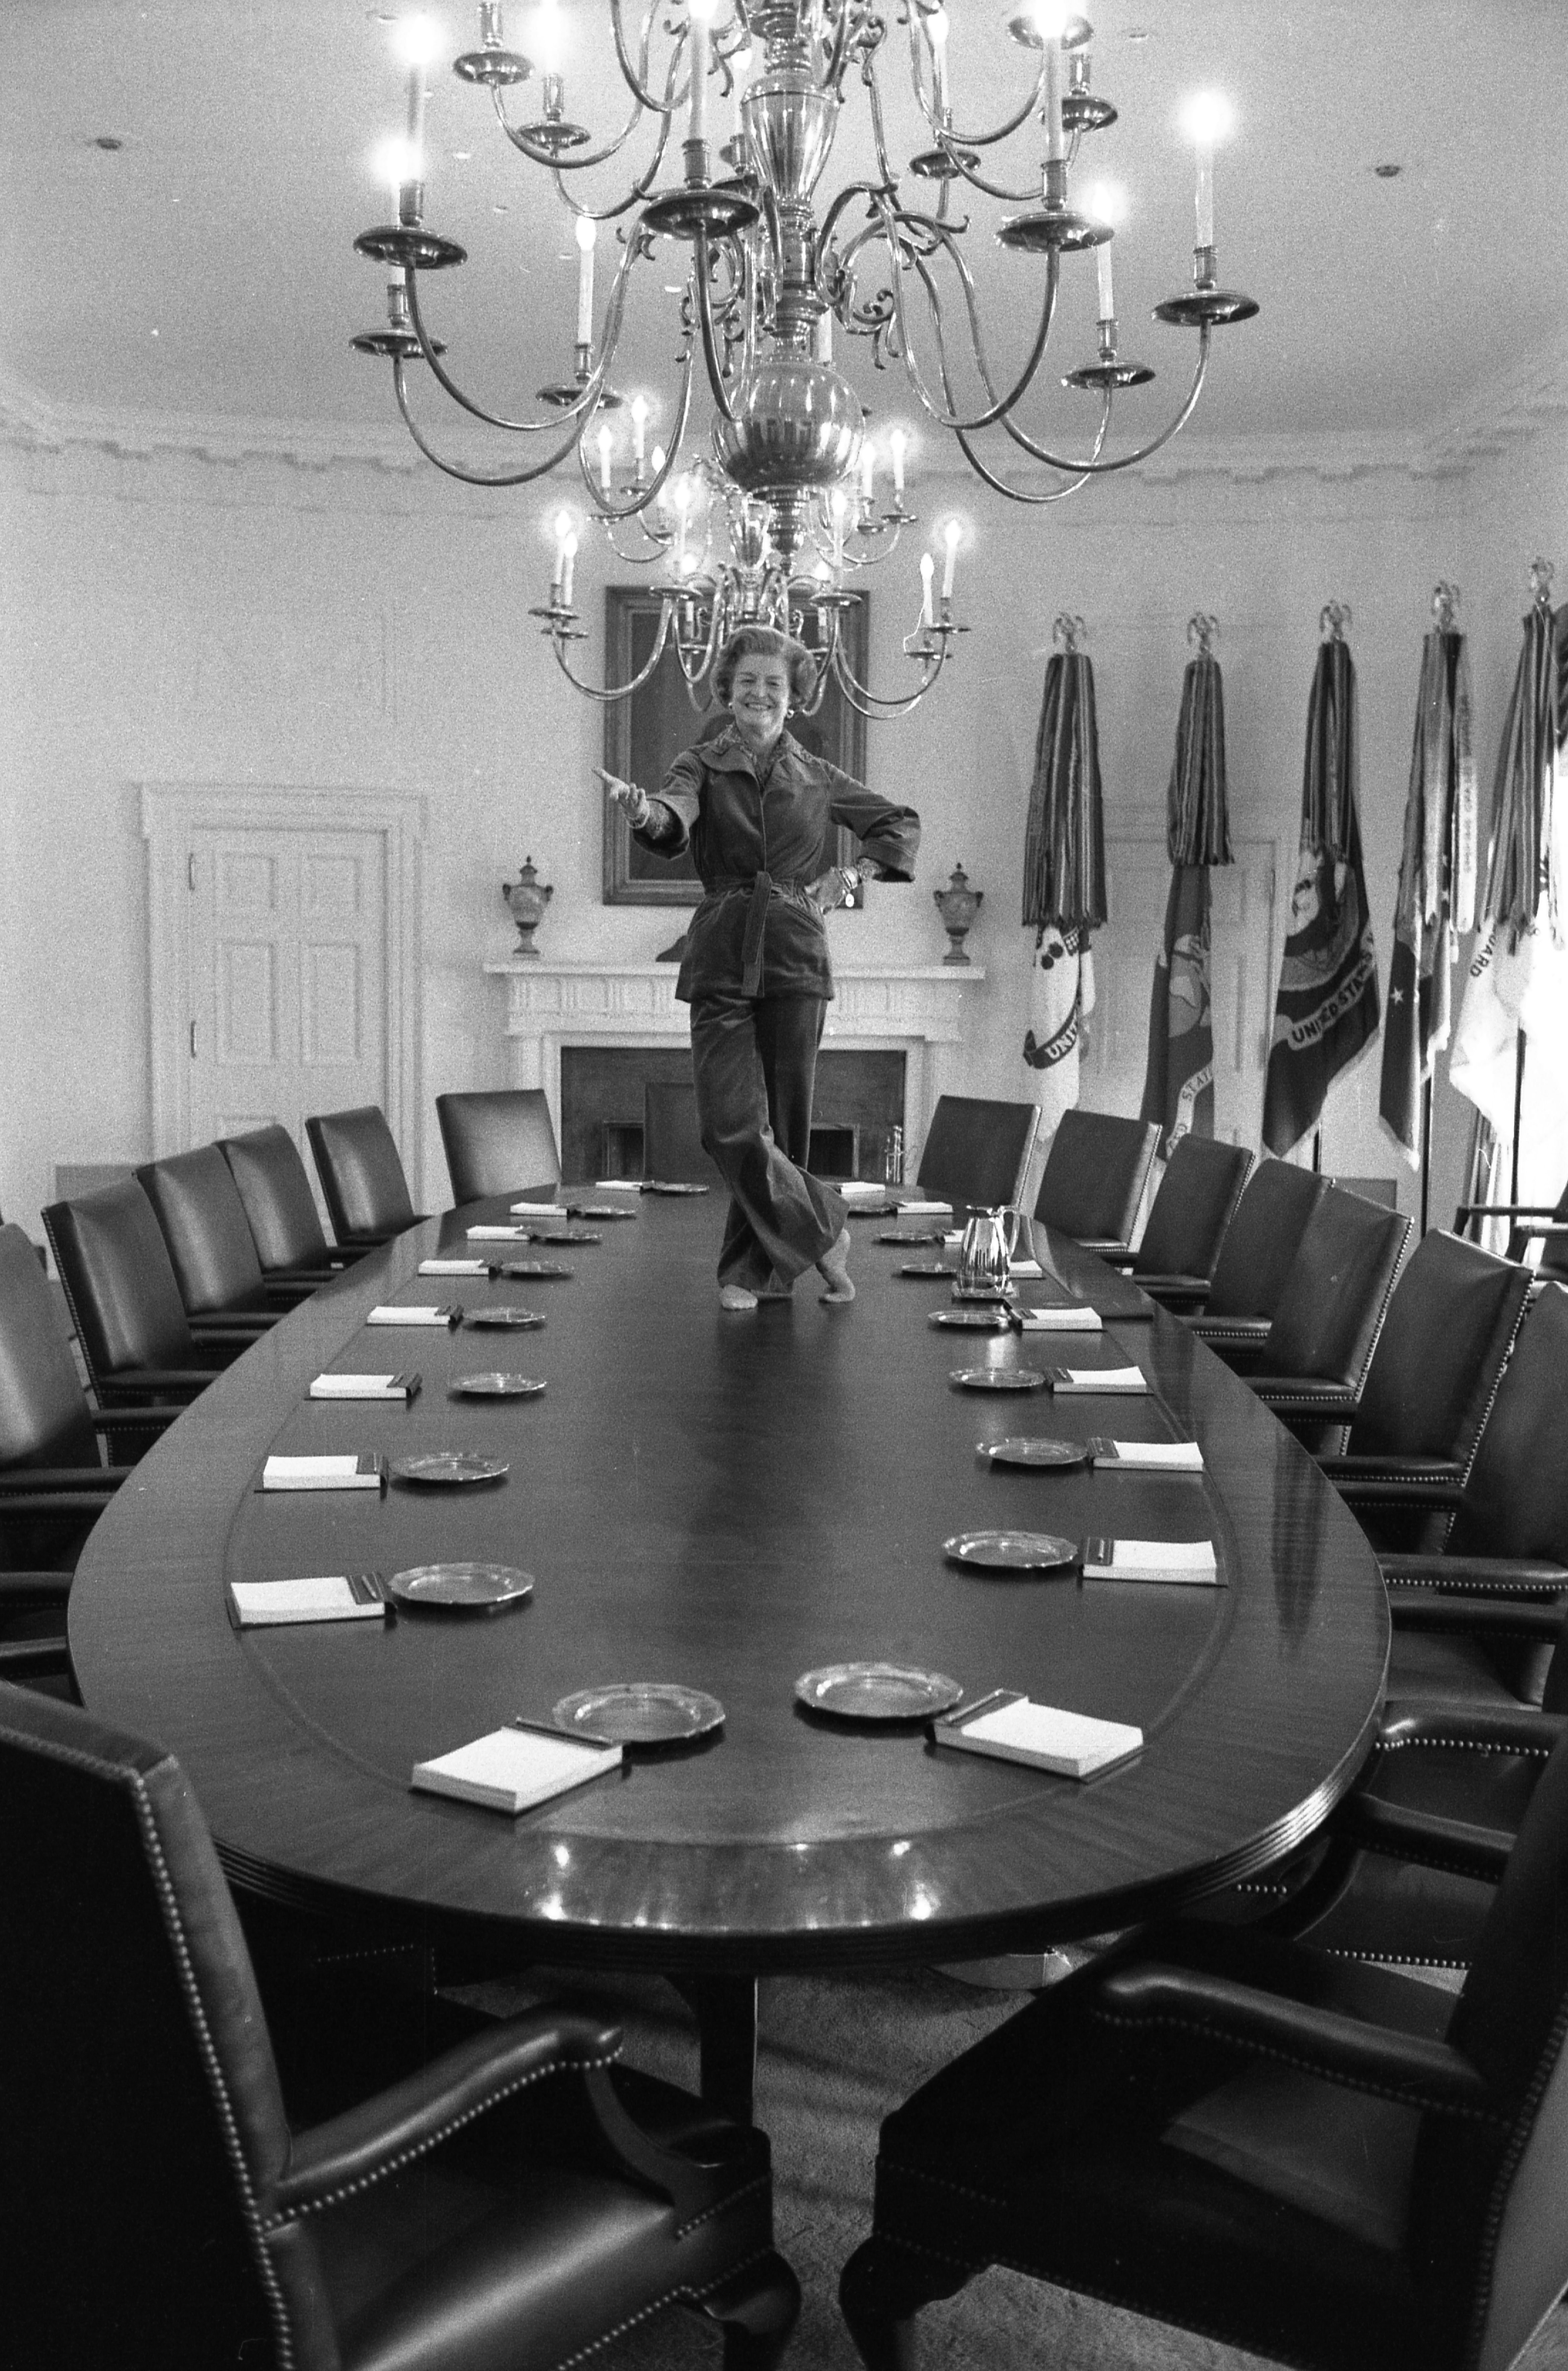 First Lady Betty Ford dances on the Cabinet Room table on the day before departing the White House upon the inauguration of President Jimmy Carter.